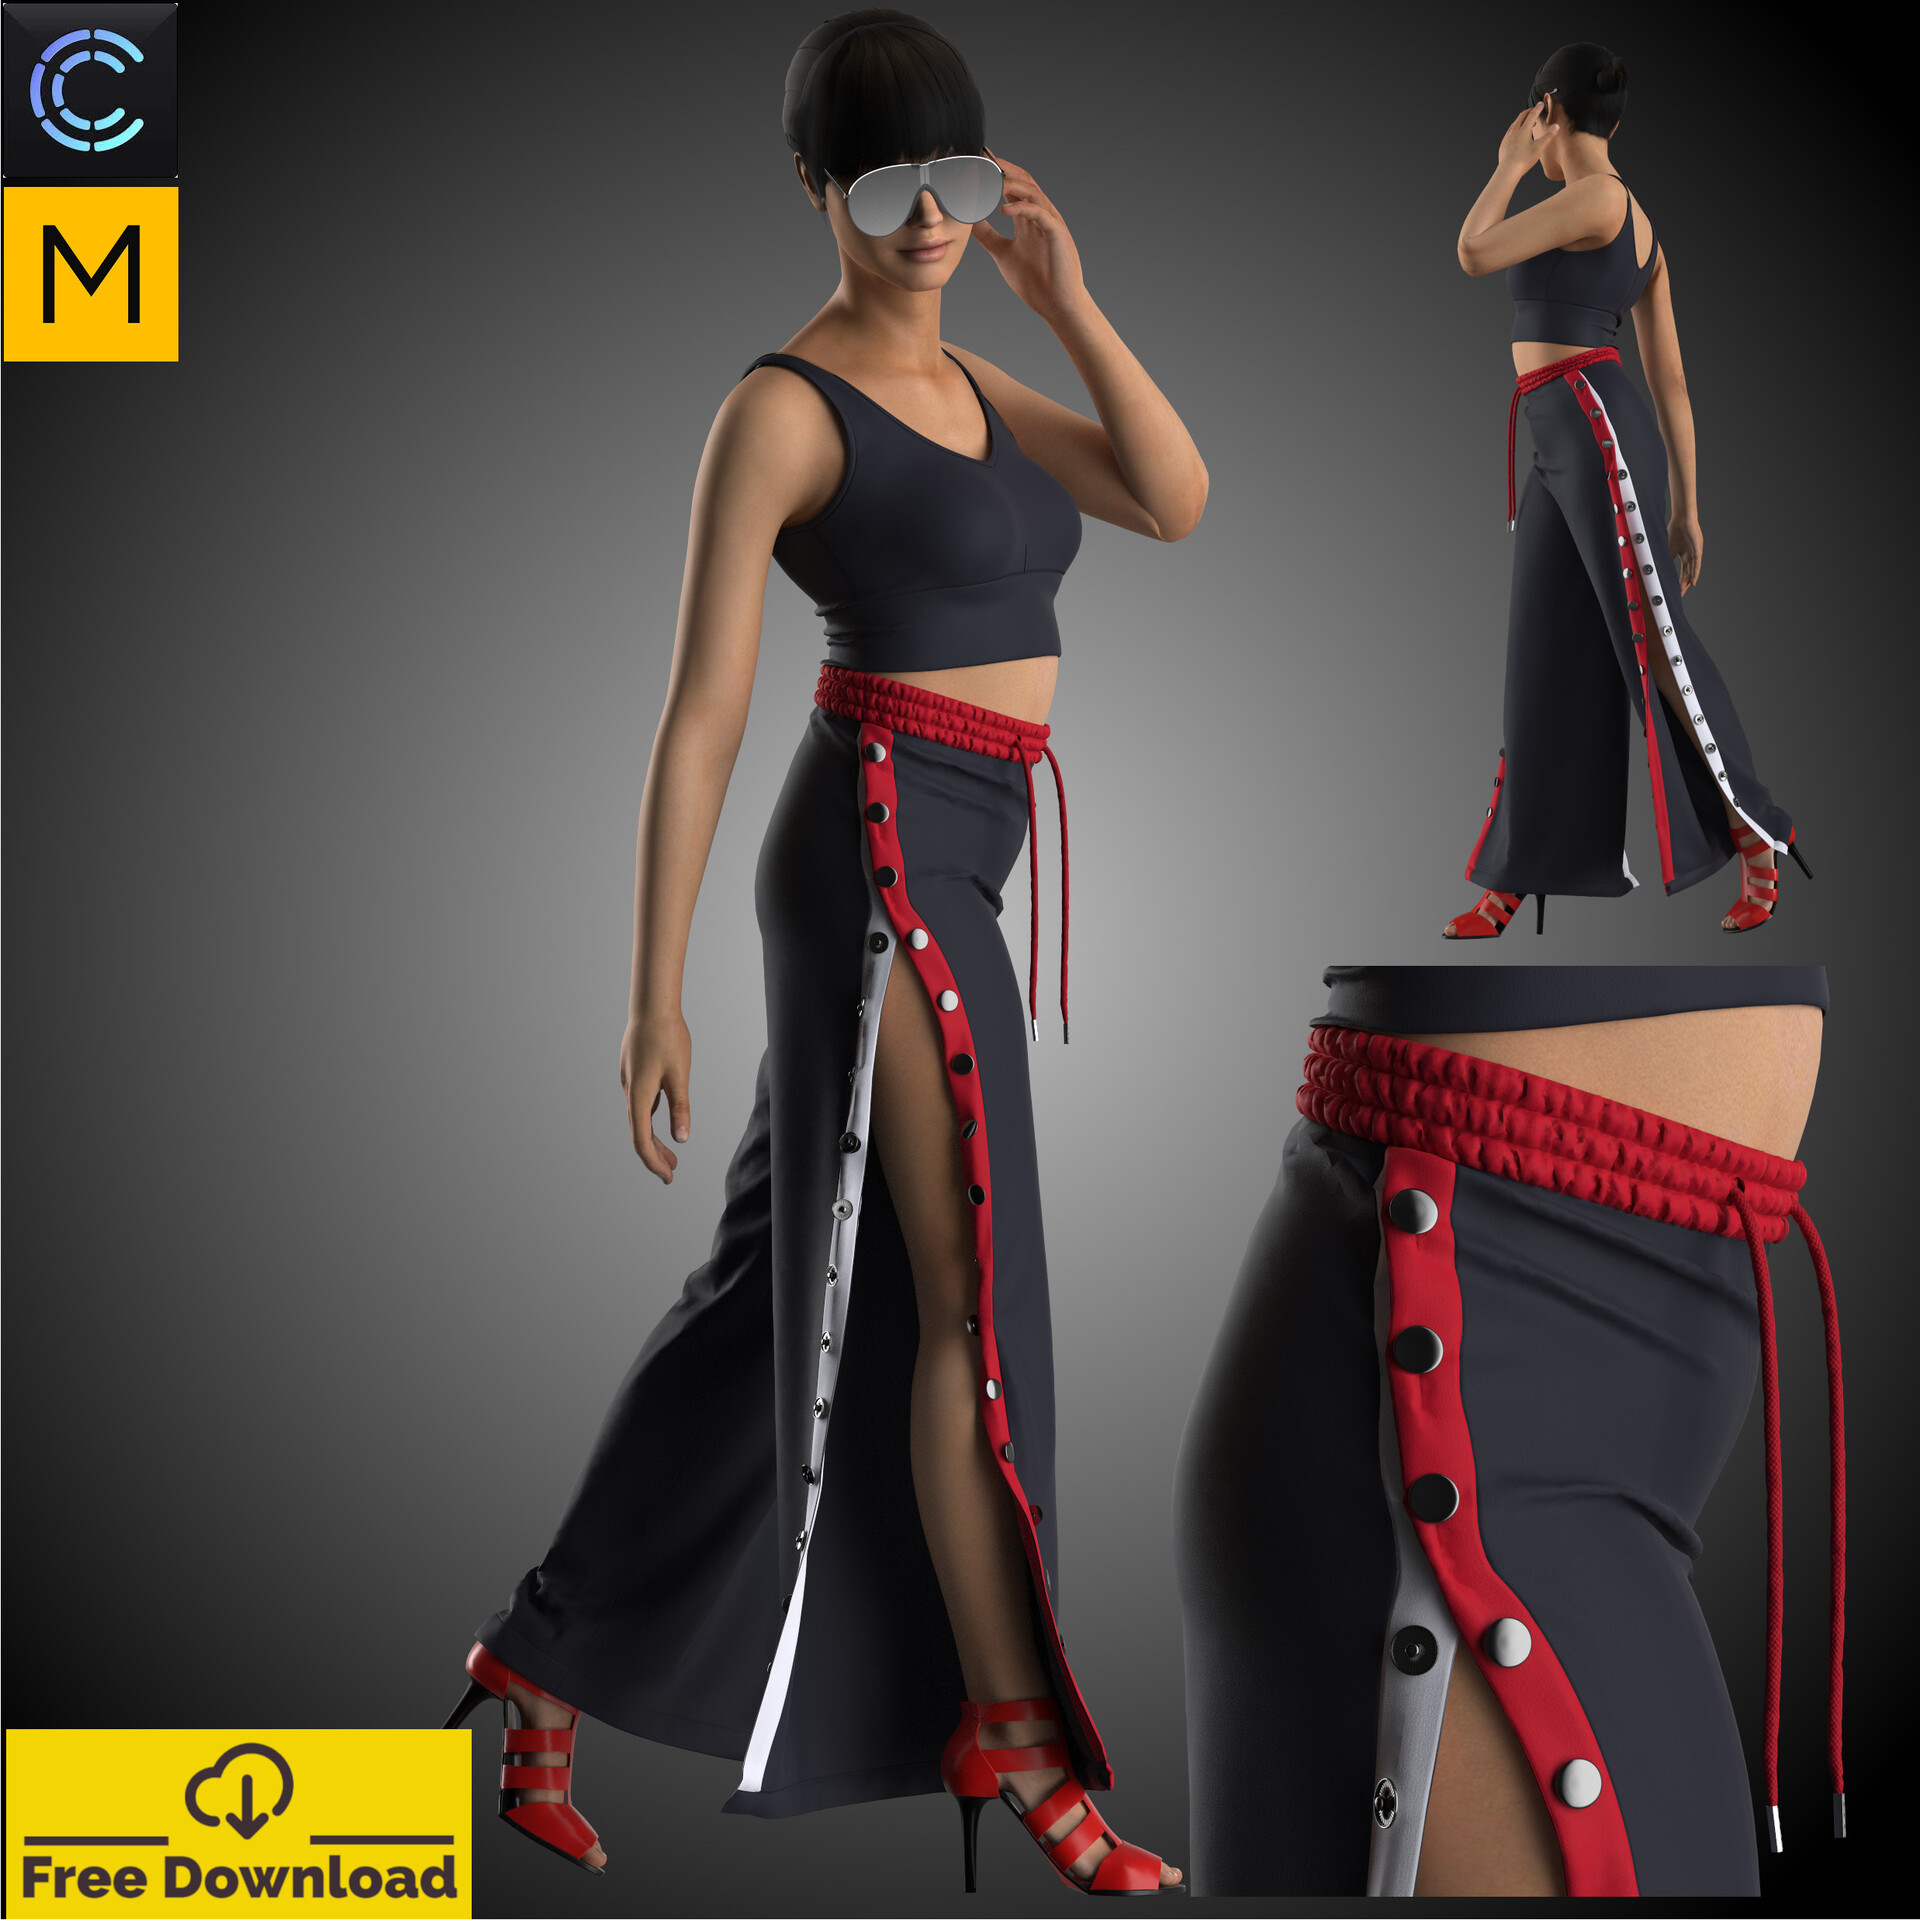 ArtStation - Free Sports Pants with Side Snaps for US Size 6